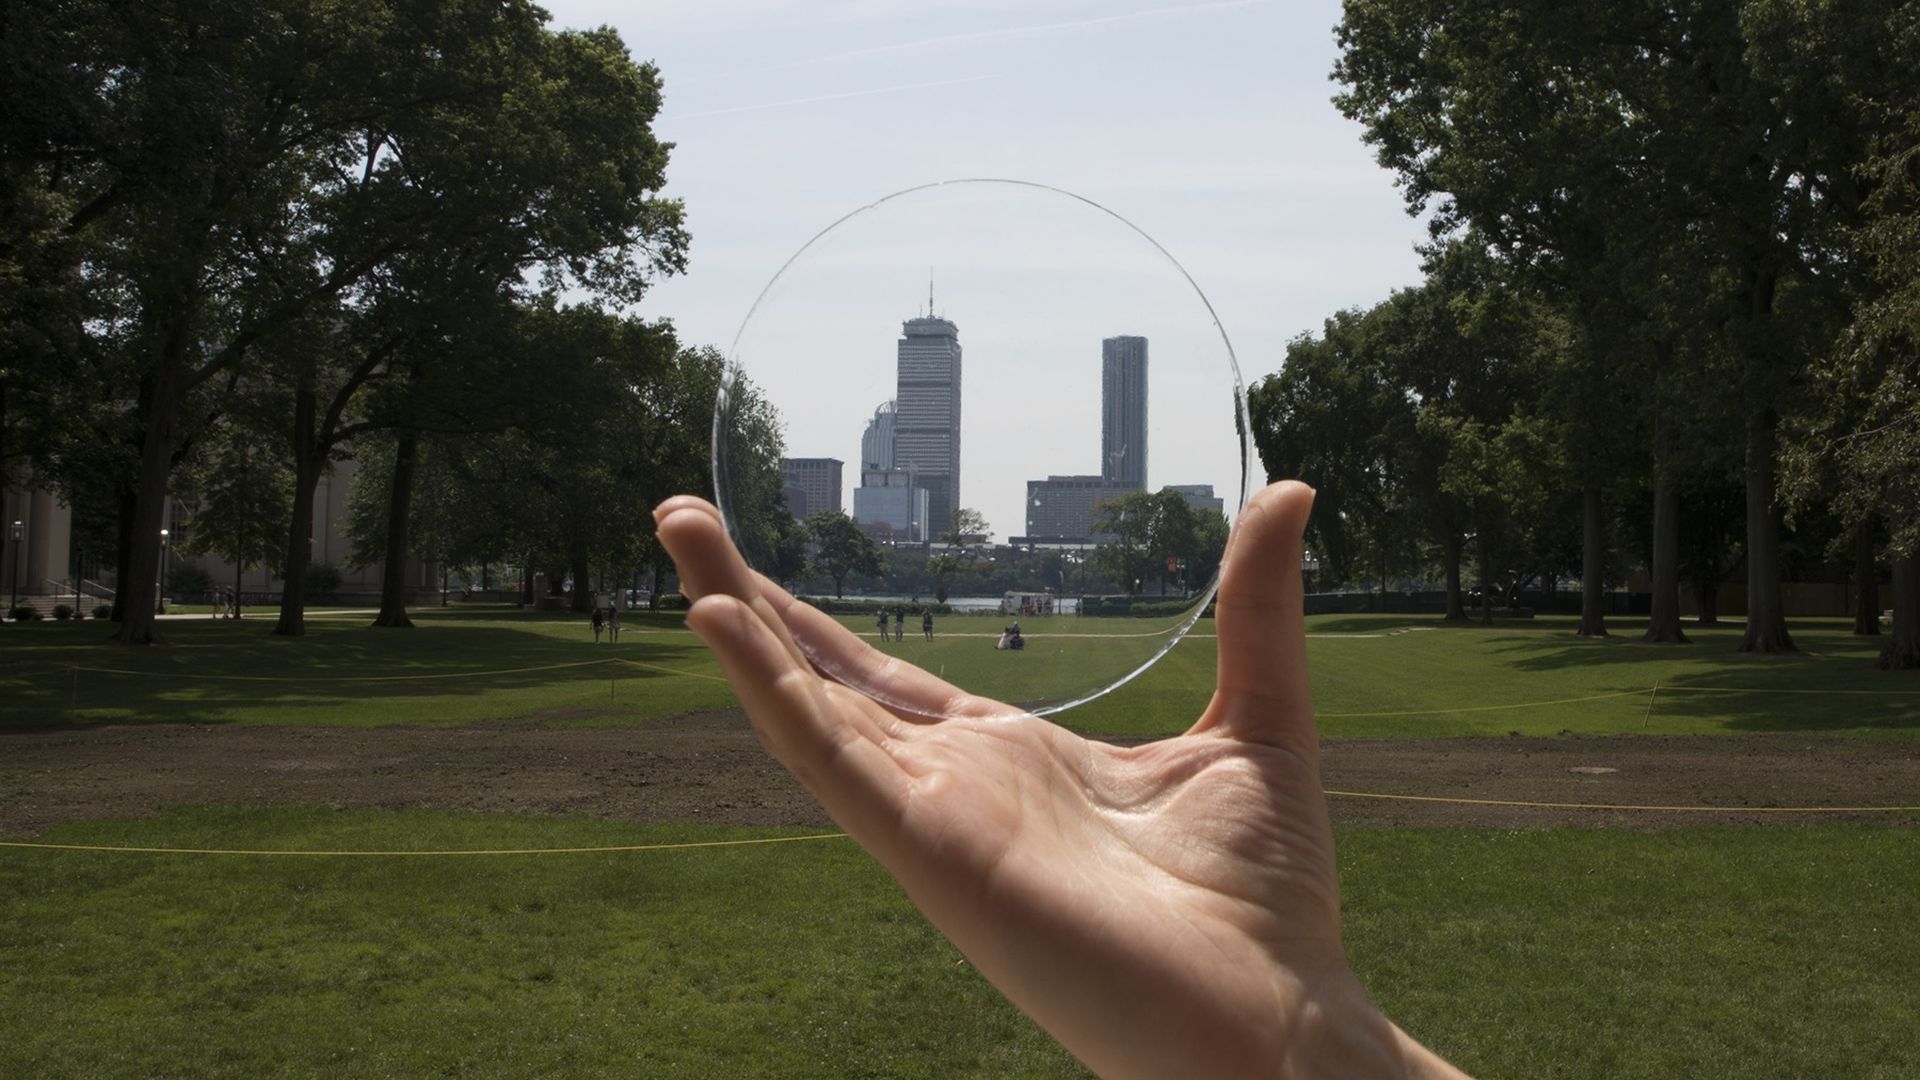 A circular slice of AeroShield's transparent coating is held in front of the Boston skyline.